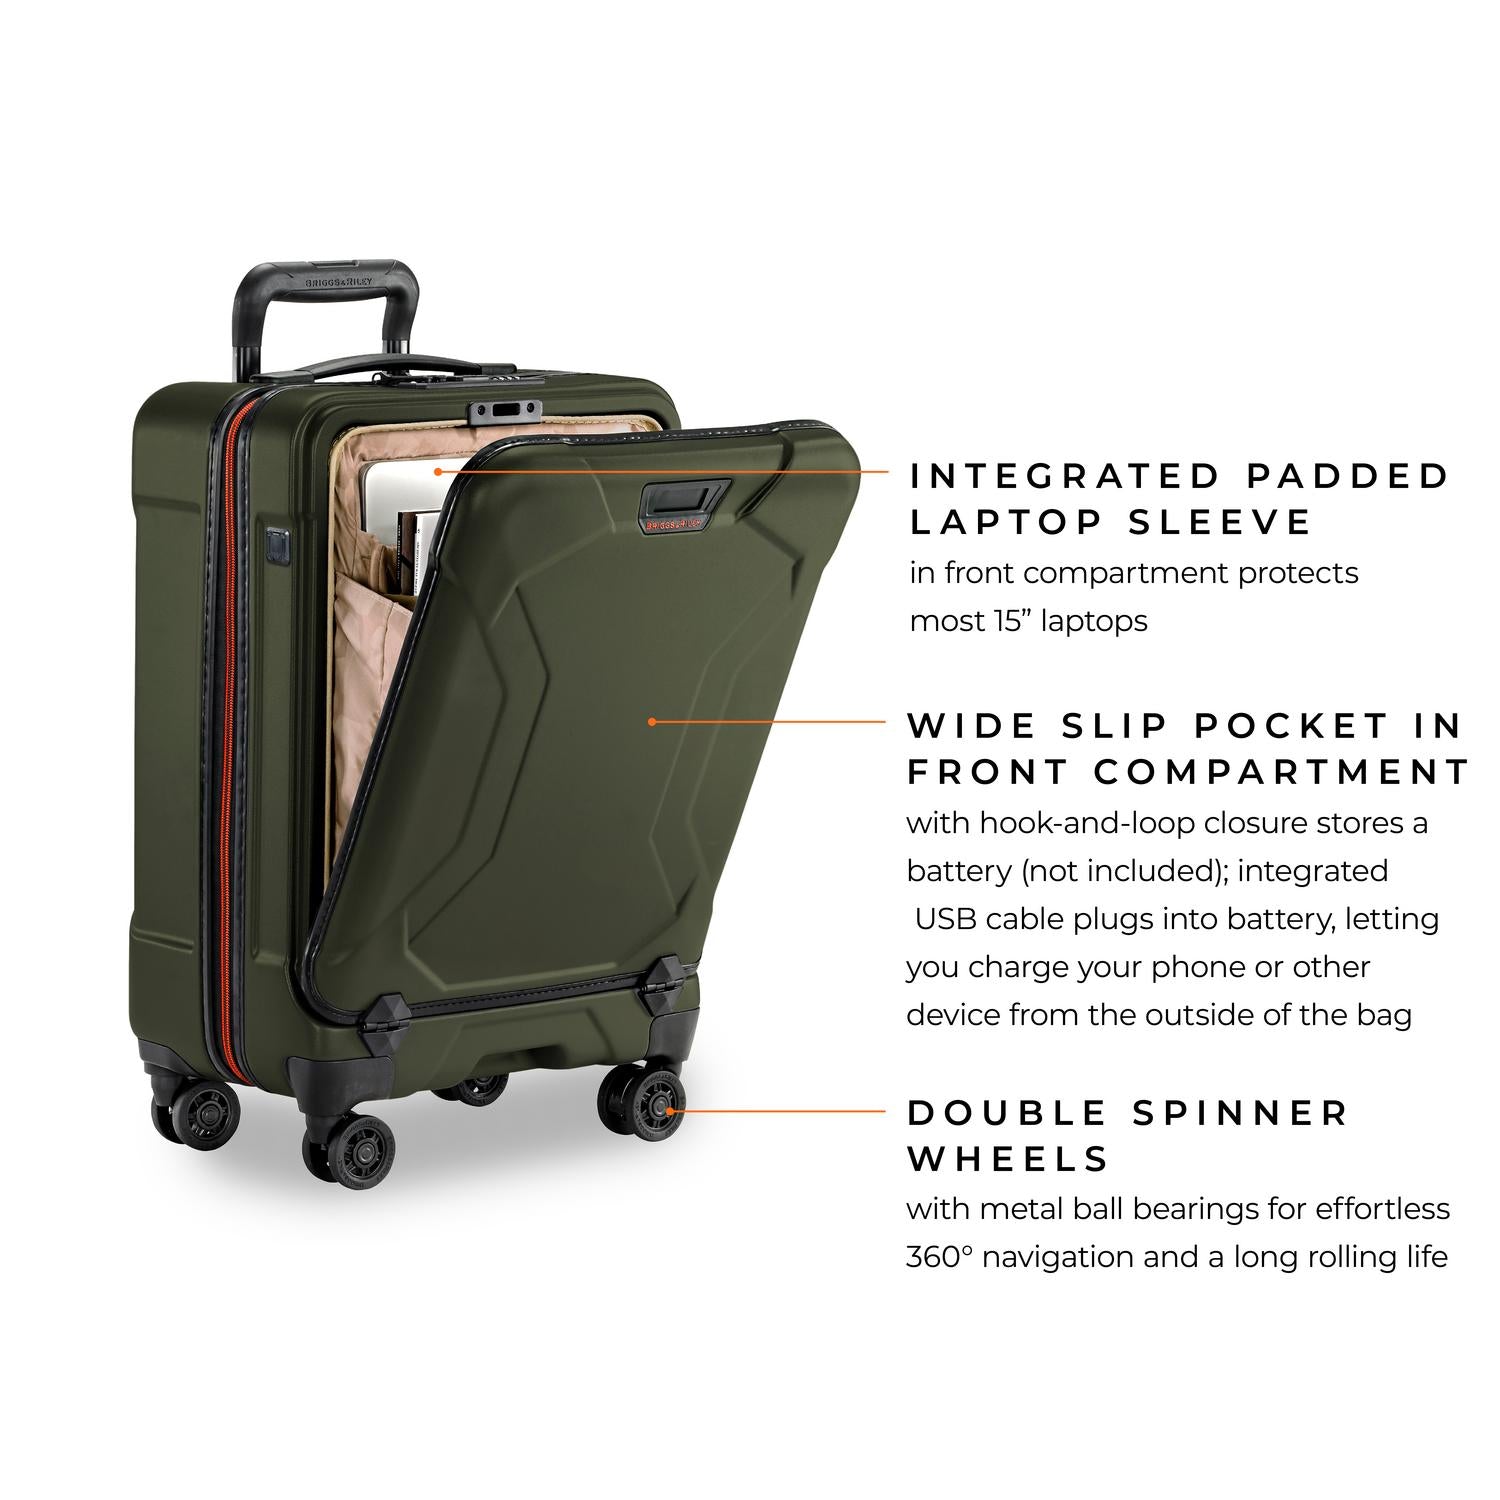 briggs & riley torq green international 21" carry-on spinner integrated padded laptop sleeve in front compartment protects most 15" laptops, wide slip pocket in front compartment with hook-and-loop closure stores a battery, integrated usb cable plus into battery, letting you charge your phone or other device from the outside of the bag, double spinner wheels with metal ball bearings for effortless 360 navigation and a long rolling life #color_hunter